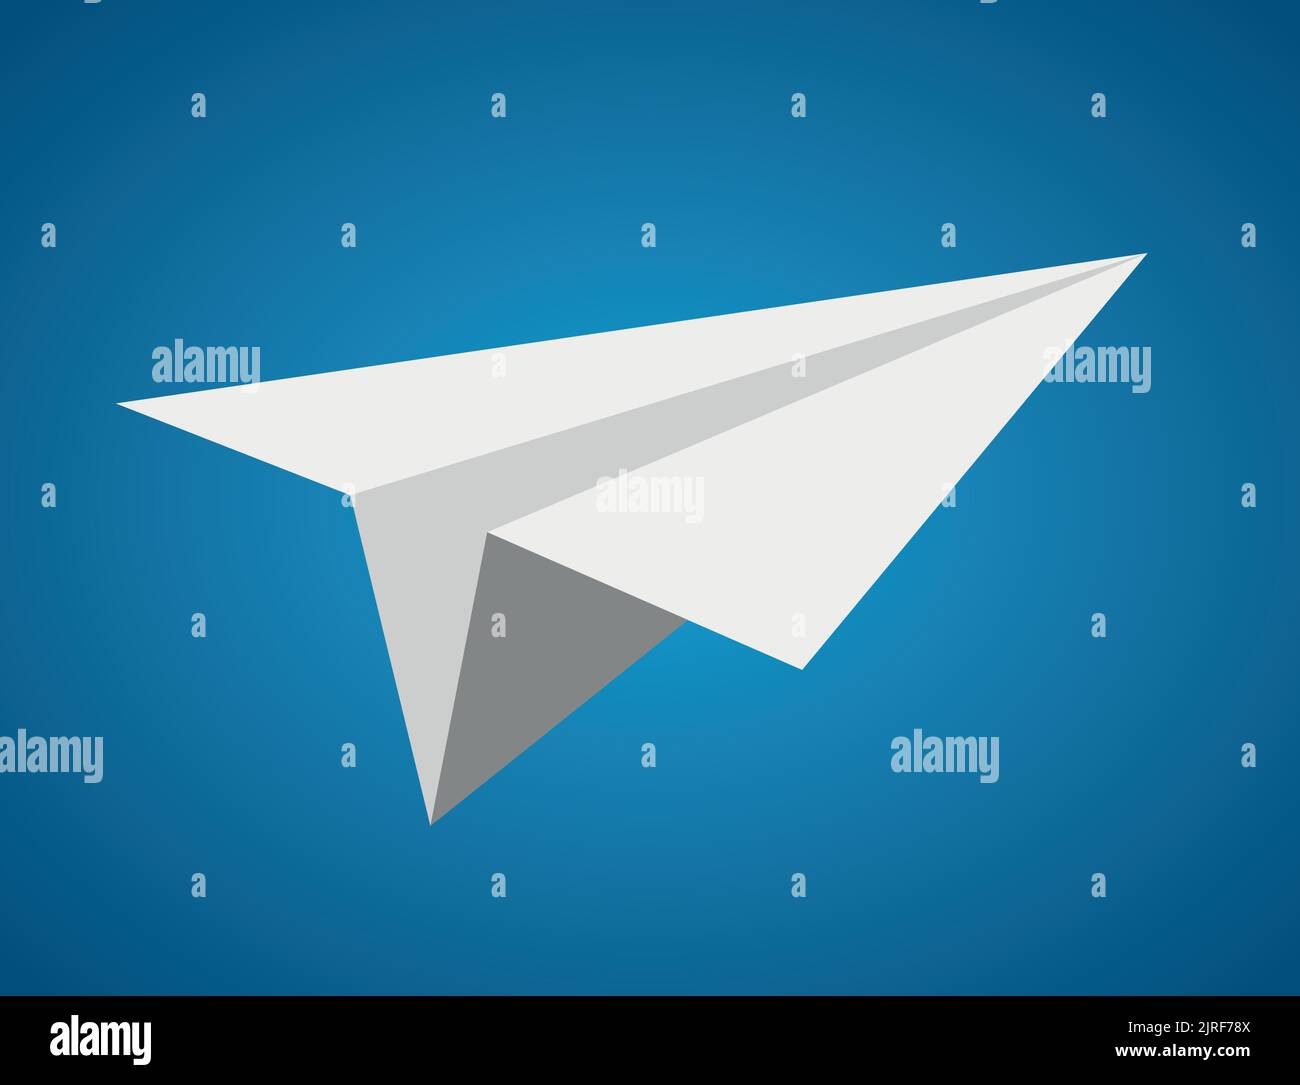 Paper plane vector illustration and paper toy airplane origami symbol Stock Vector